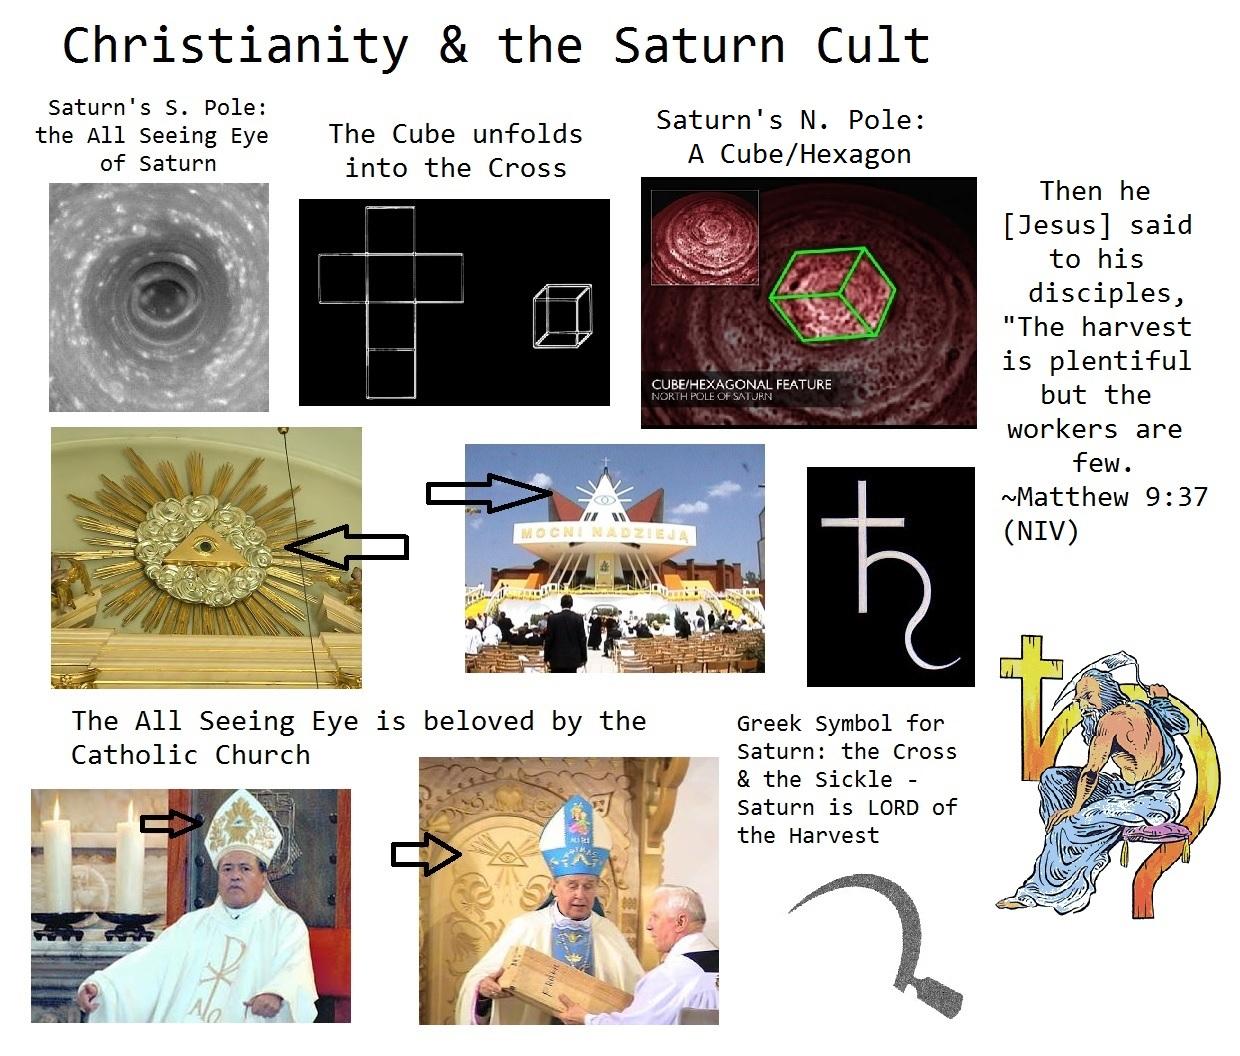 2) Saturn and Christianity